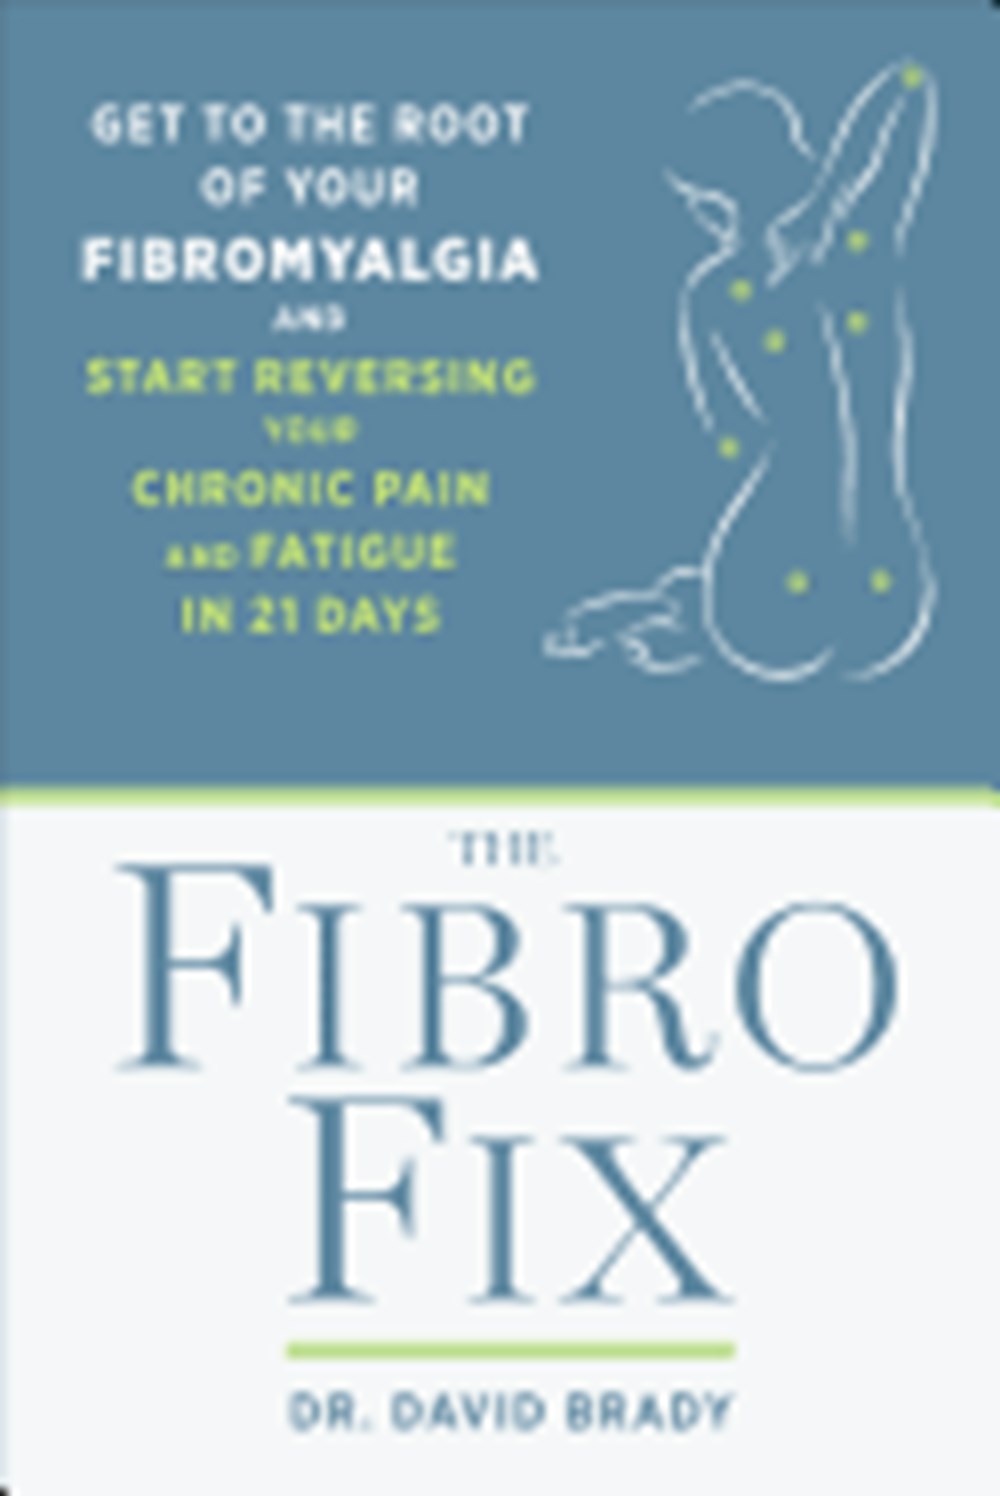 Fibro Fix: Get to the Root of Your Fibromyalgia and Start Reversing Your Chronic Pain and Fatigue in